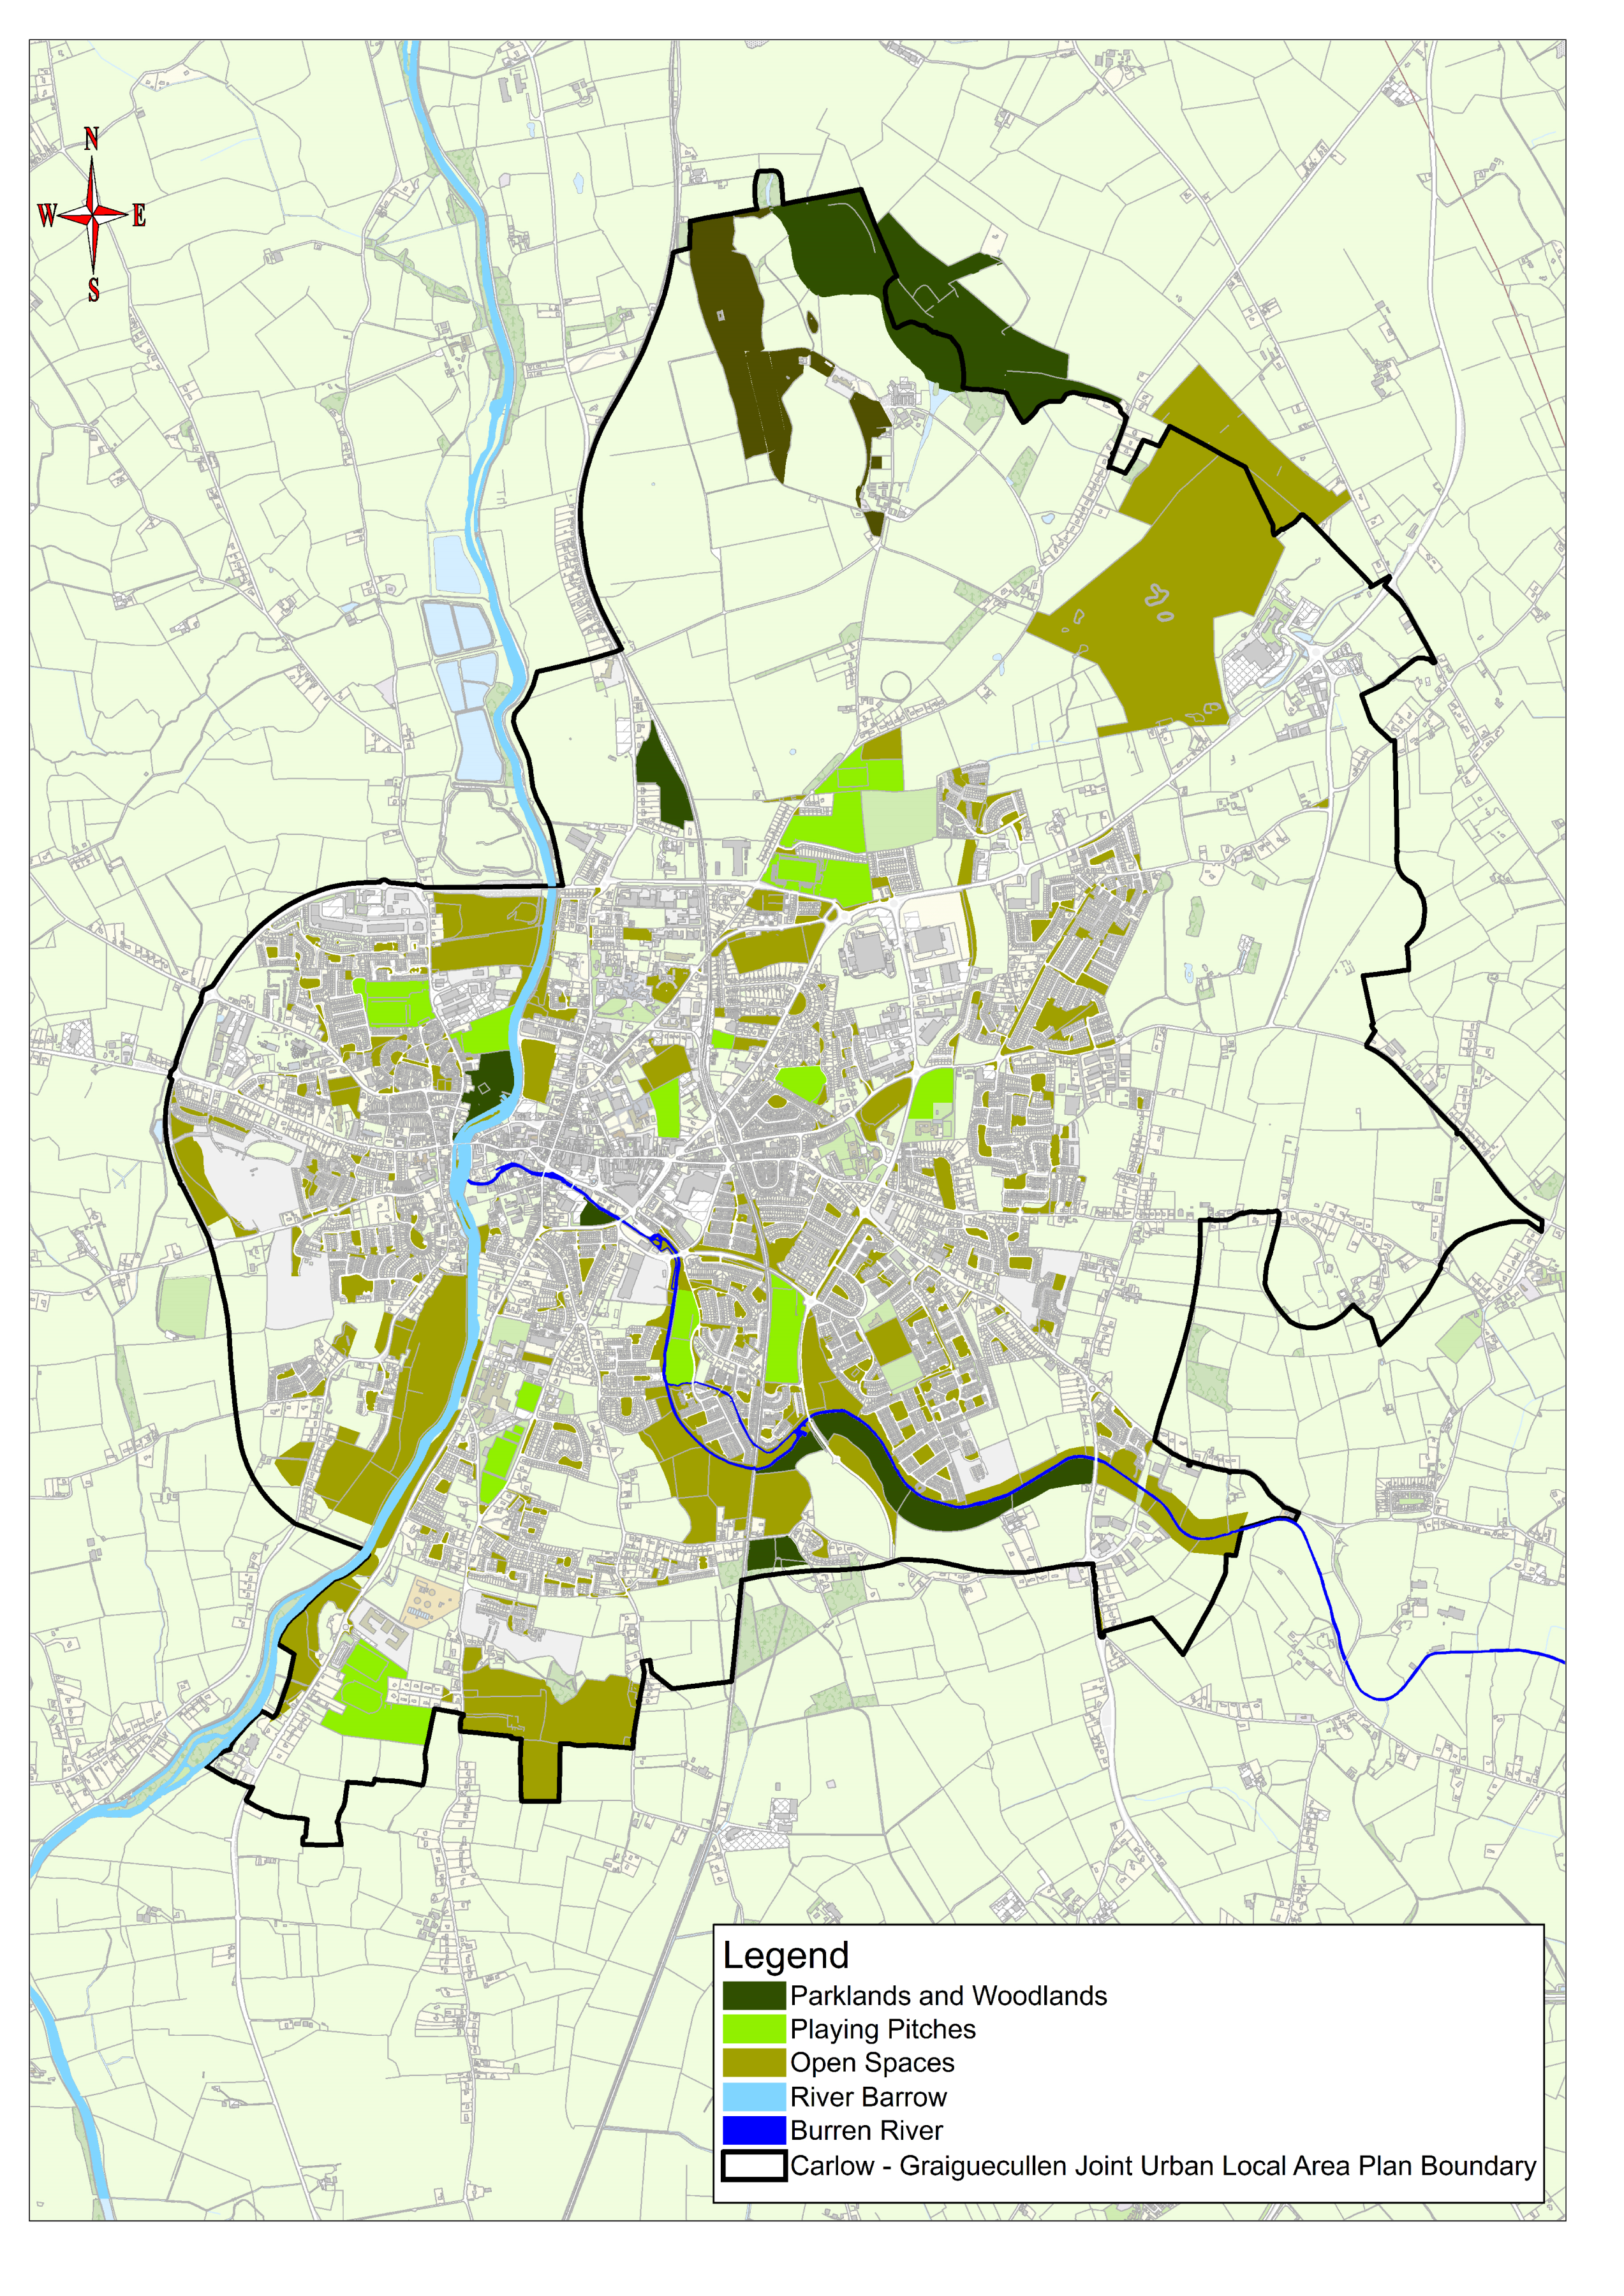 Map 10.3:  Network of Existing Green Infrastructure in Carlow-Graiguecullen